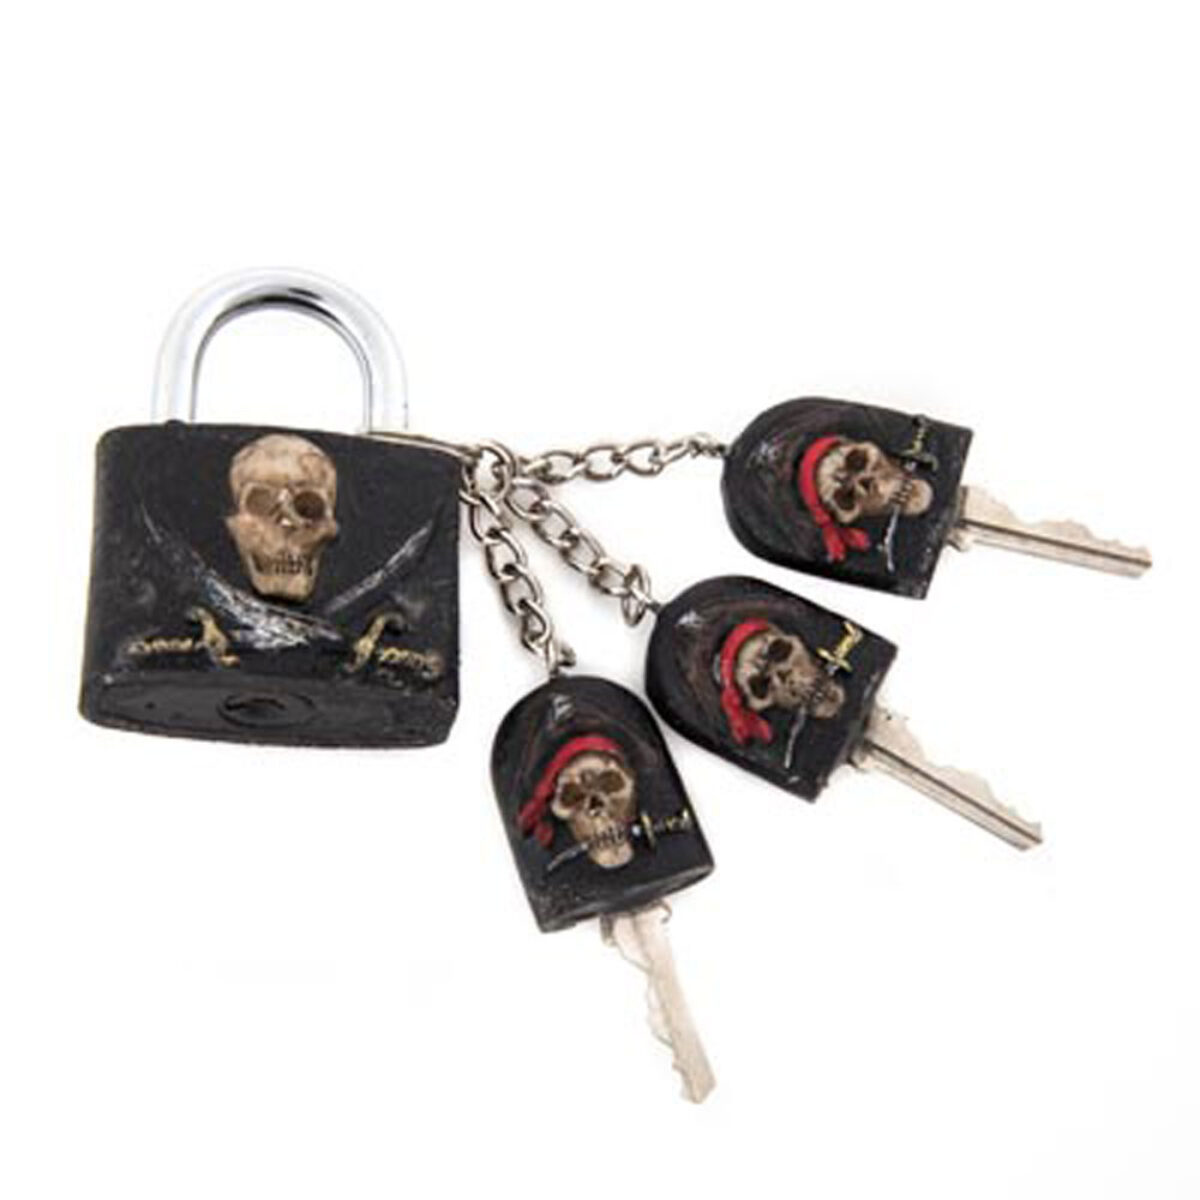 Jolly Rodger Skull and Cross Sword Lock and 3 Keys Functional Set Pirate Secure 